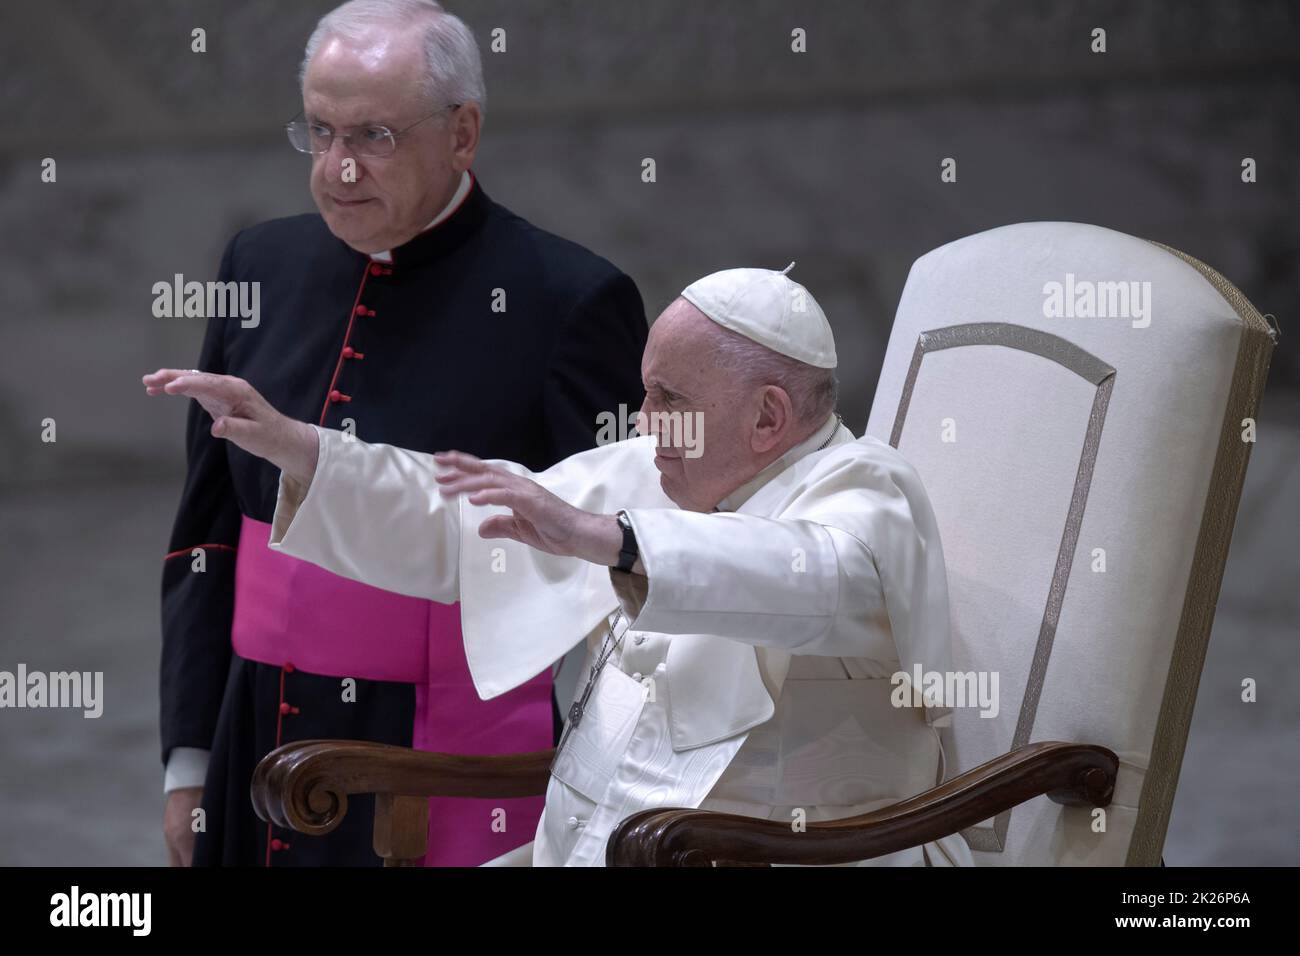 Vatican City, Vatican, 22 September 2022. Pope Francis during a audience to the participants of the Deloitte Global meeting in the Paul VI Hall. Credit: Maria Grazia Picciarella/Alamy Live News Stock Photo